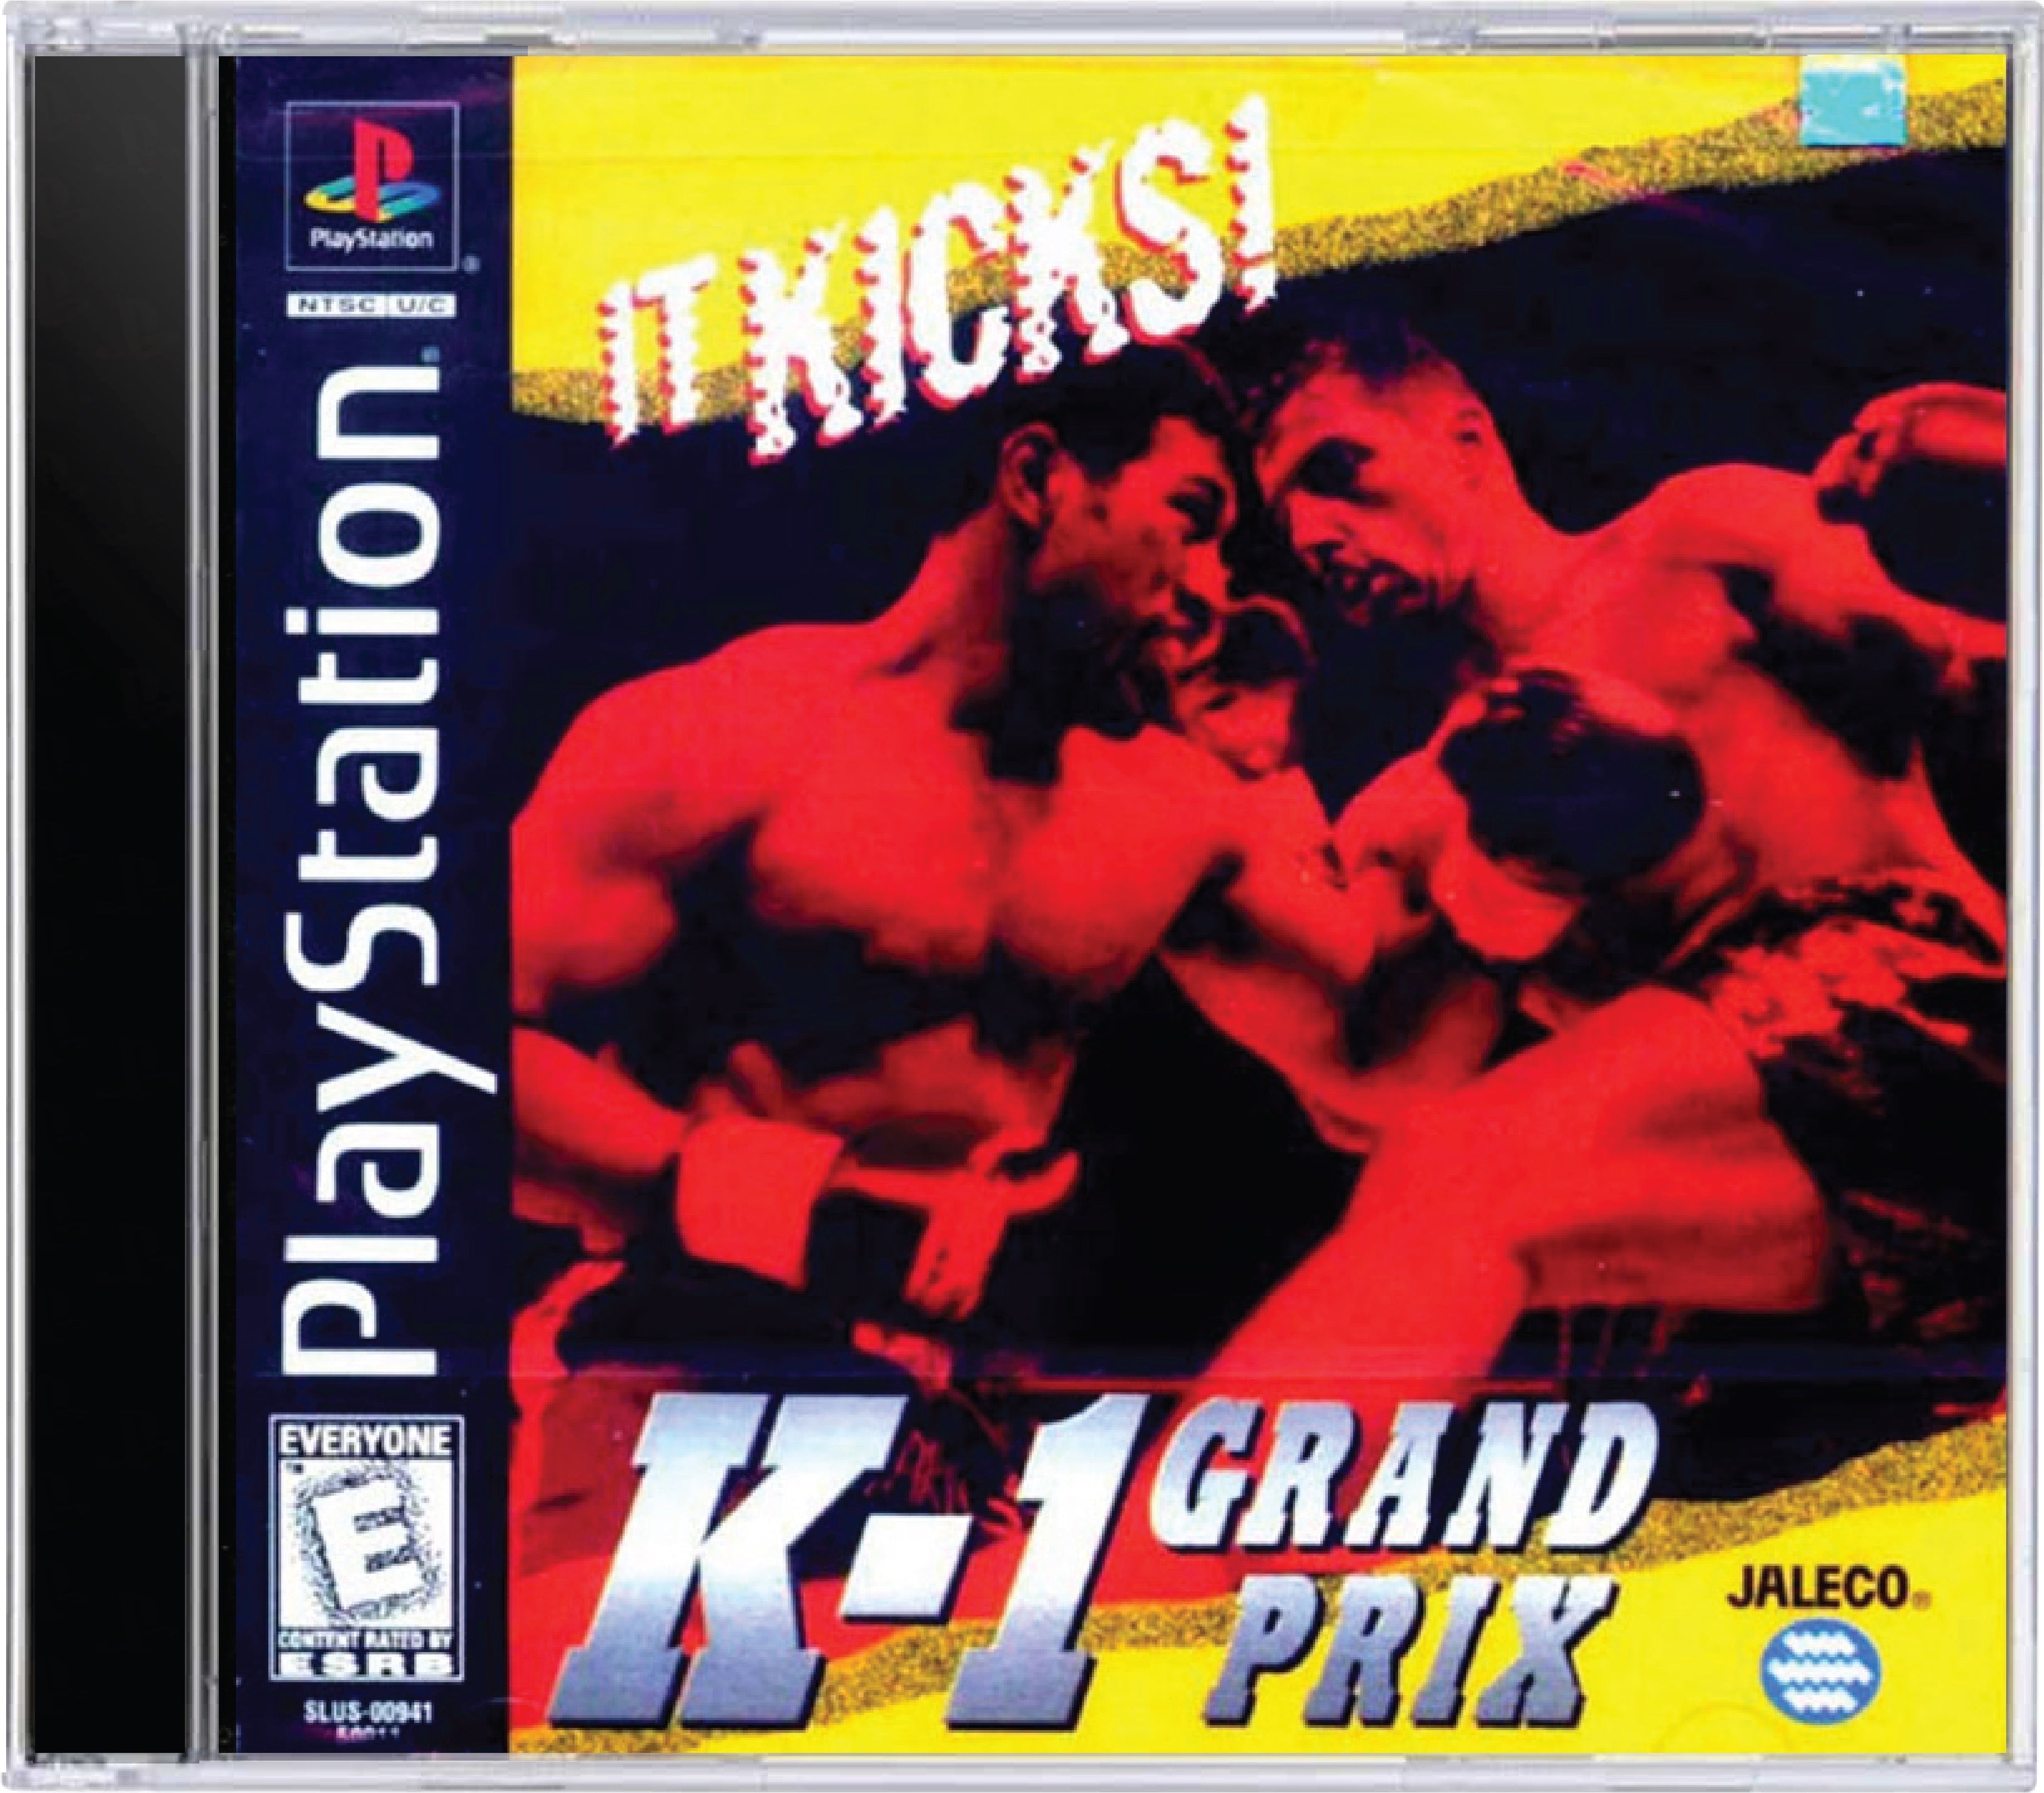 K-1 Grand Prix Cover Art and Product Photo